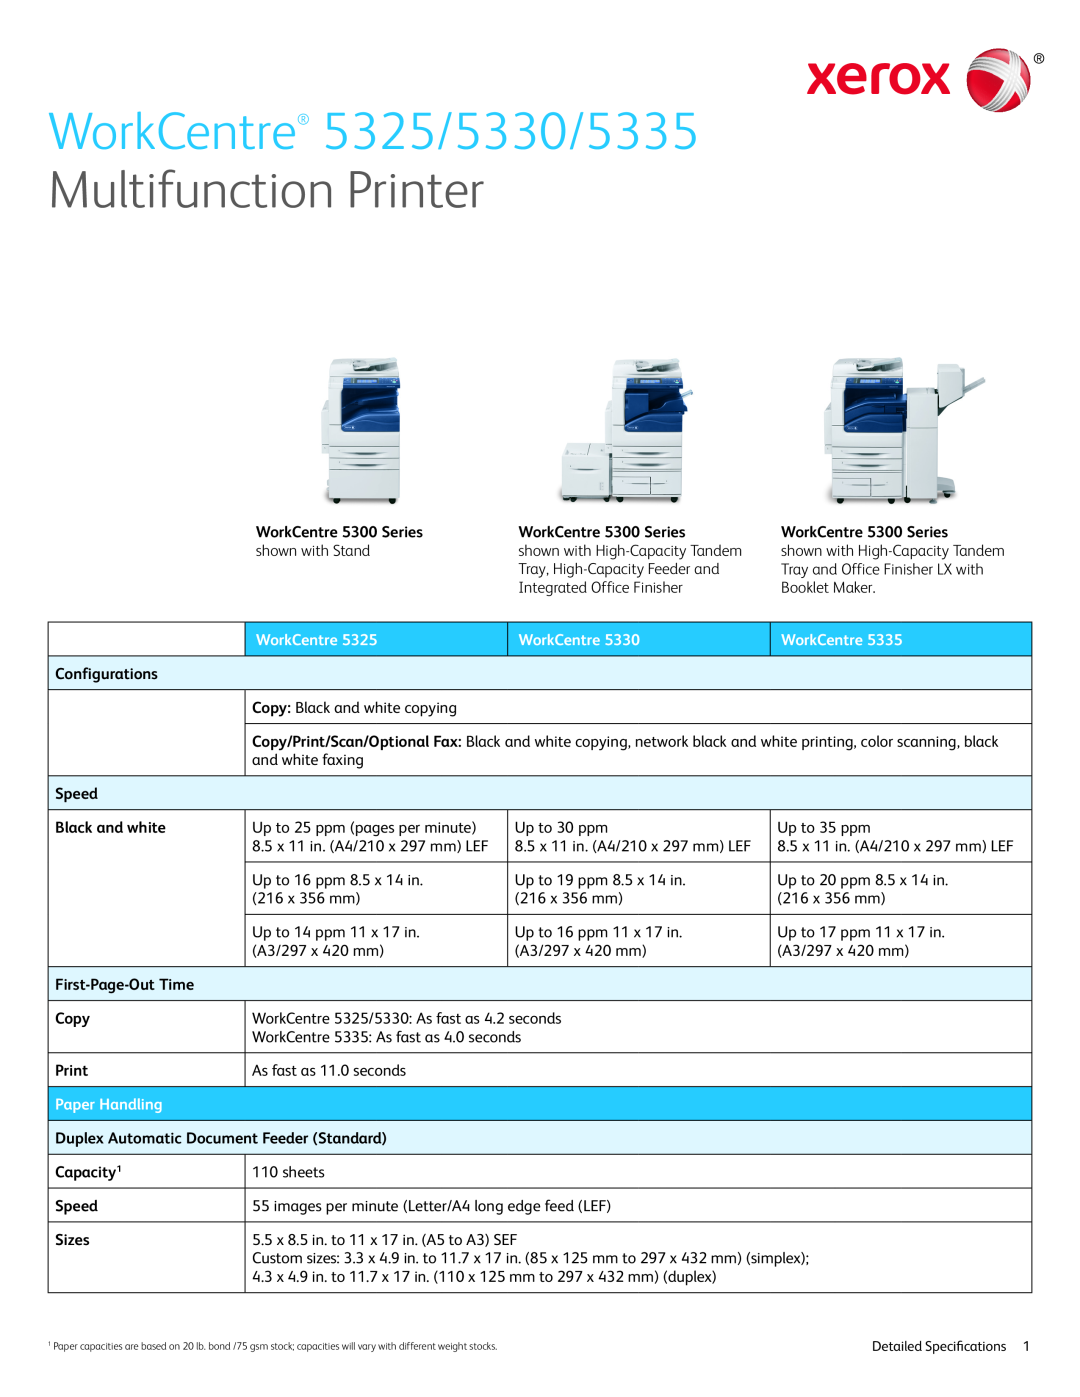 Xerox specifications Paper Handling, WorkCentre 5325/5330/5335, Multifunction Printer 